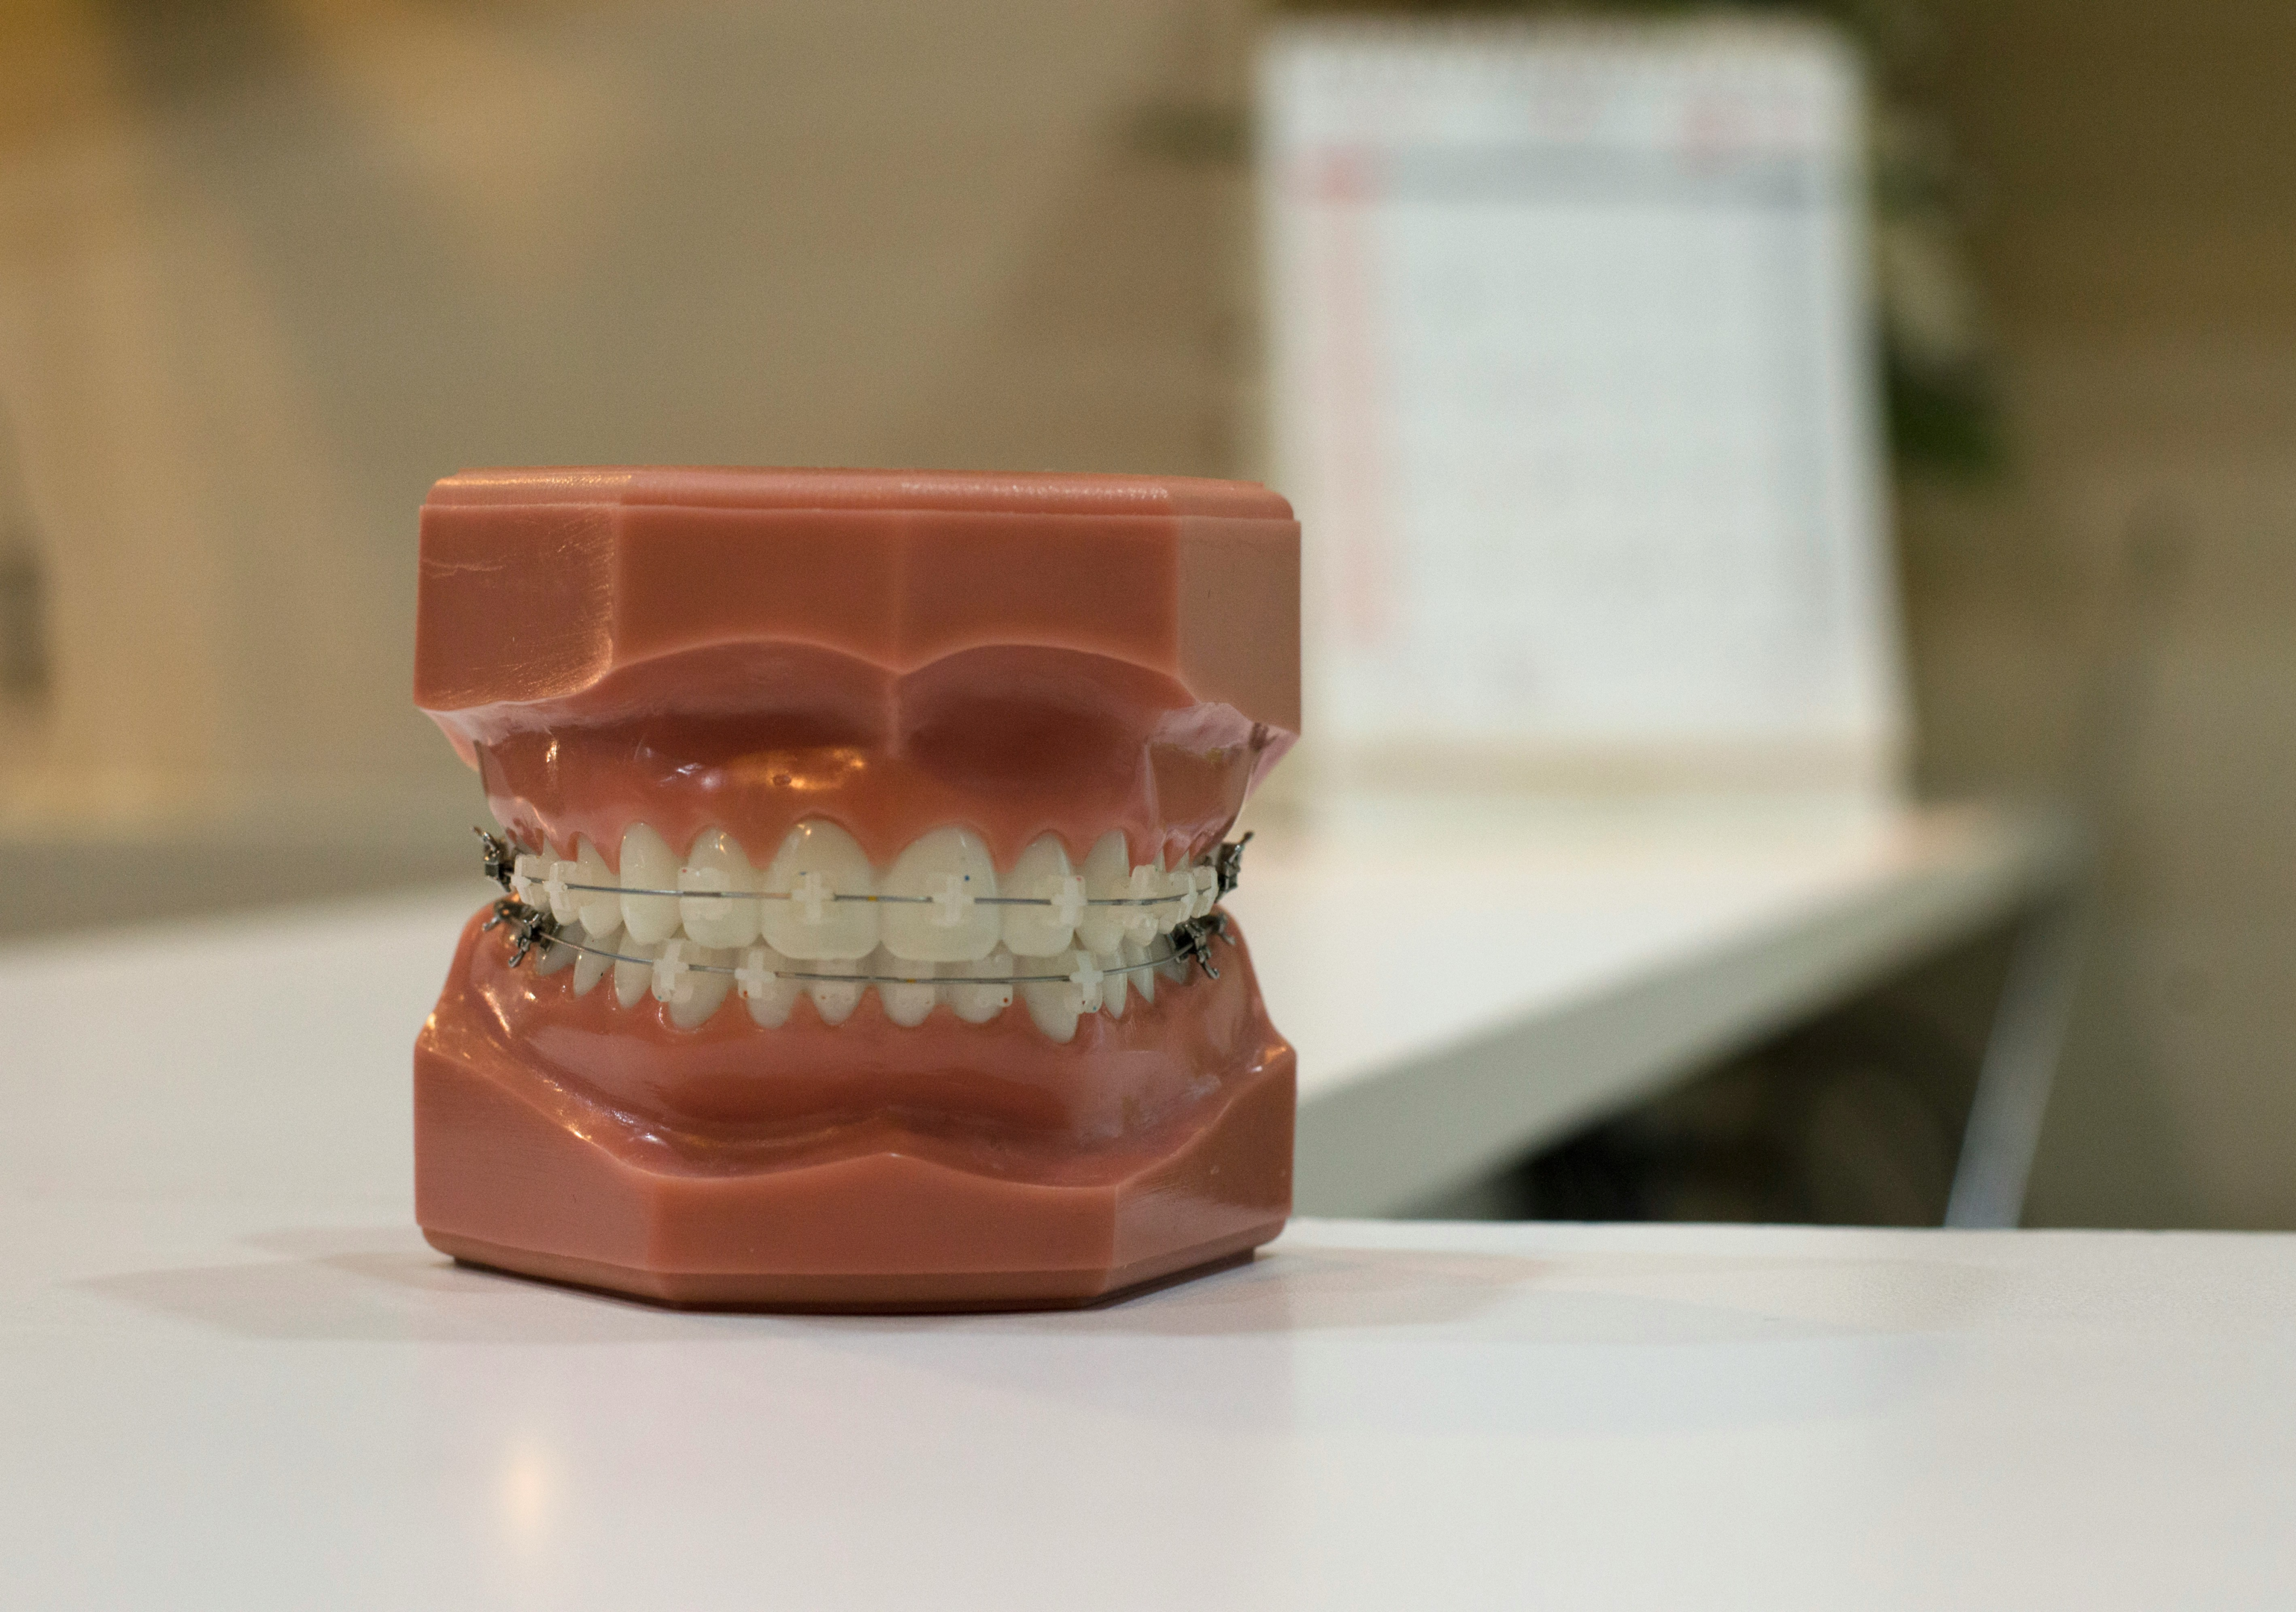 a dental model with braces on the teeth showing clear braces